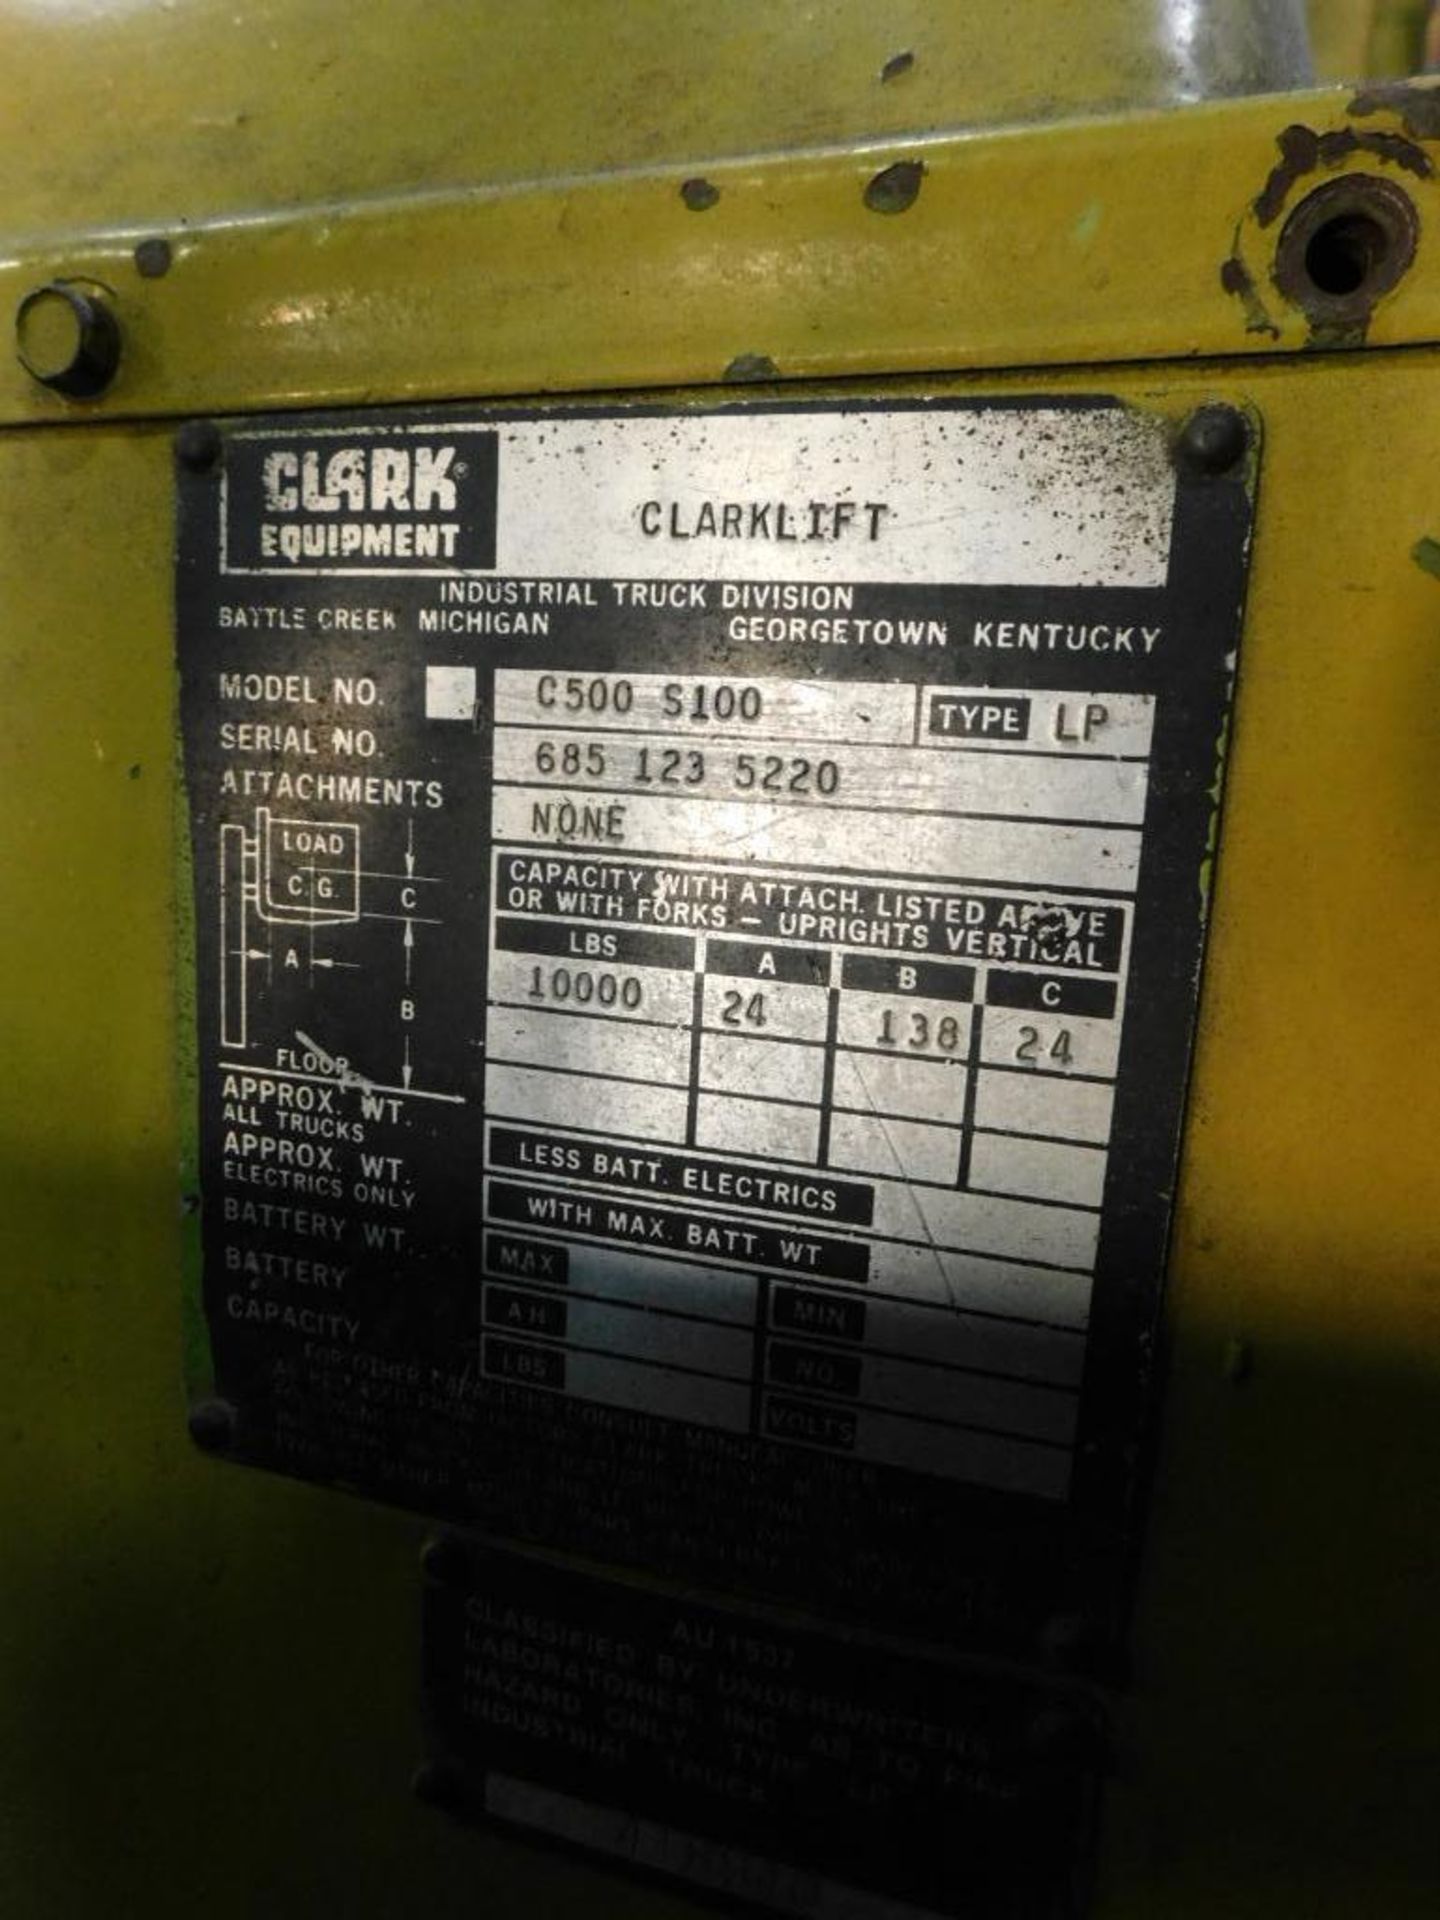 Clark 10,000 Lb. LP Forklift Model C500 S100, S/N 6851235220, Solid Tires, 161" Max Lift Height, Sin - Image 14 of 14